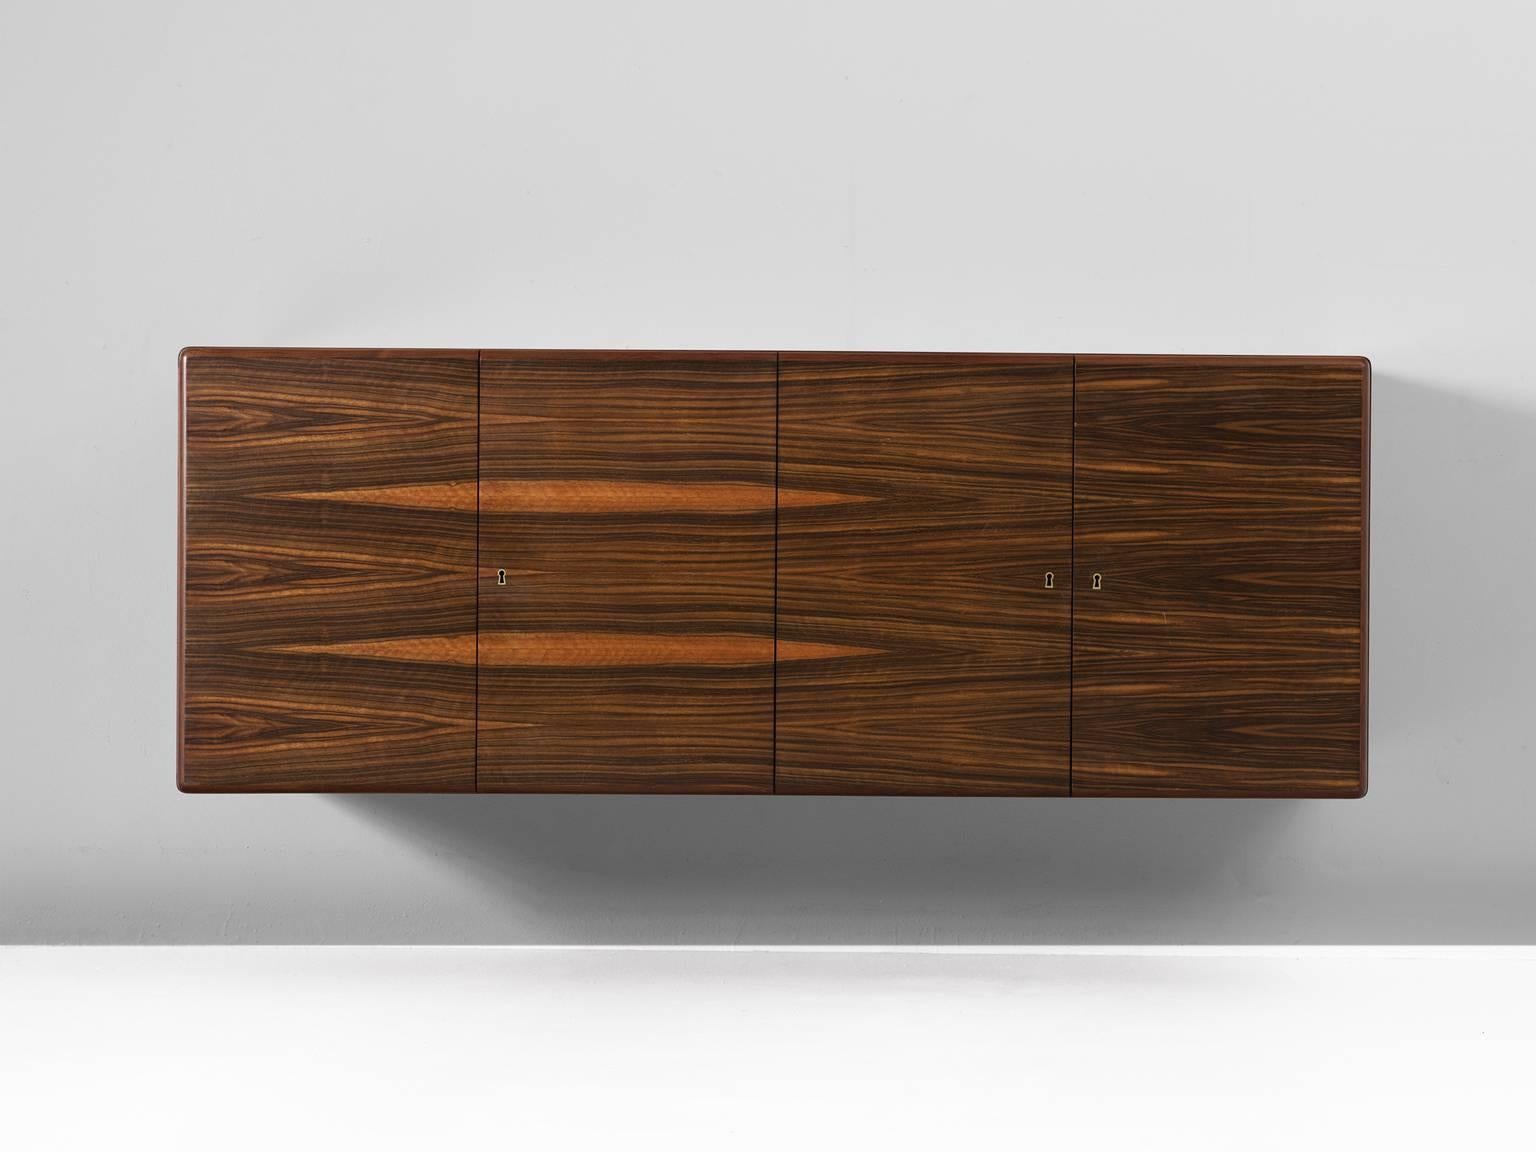 Wall-mounted sideboard in rosewood by Jos De Mey, Belgium, 1960s. 

Modern and sleek wall-mounted credenza by Belgium designer Jos De Mey. A four door cabinet with beautiful rosewood veneer. The grain of the wood on the front is absolutely